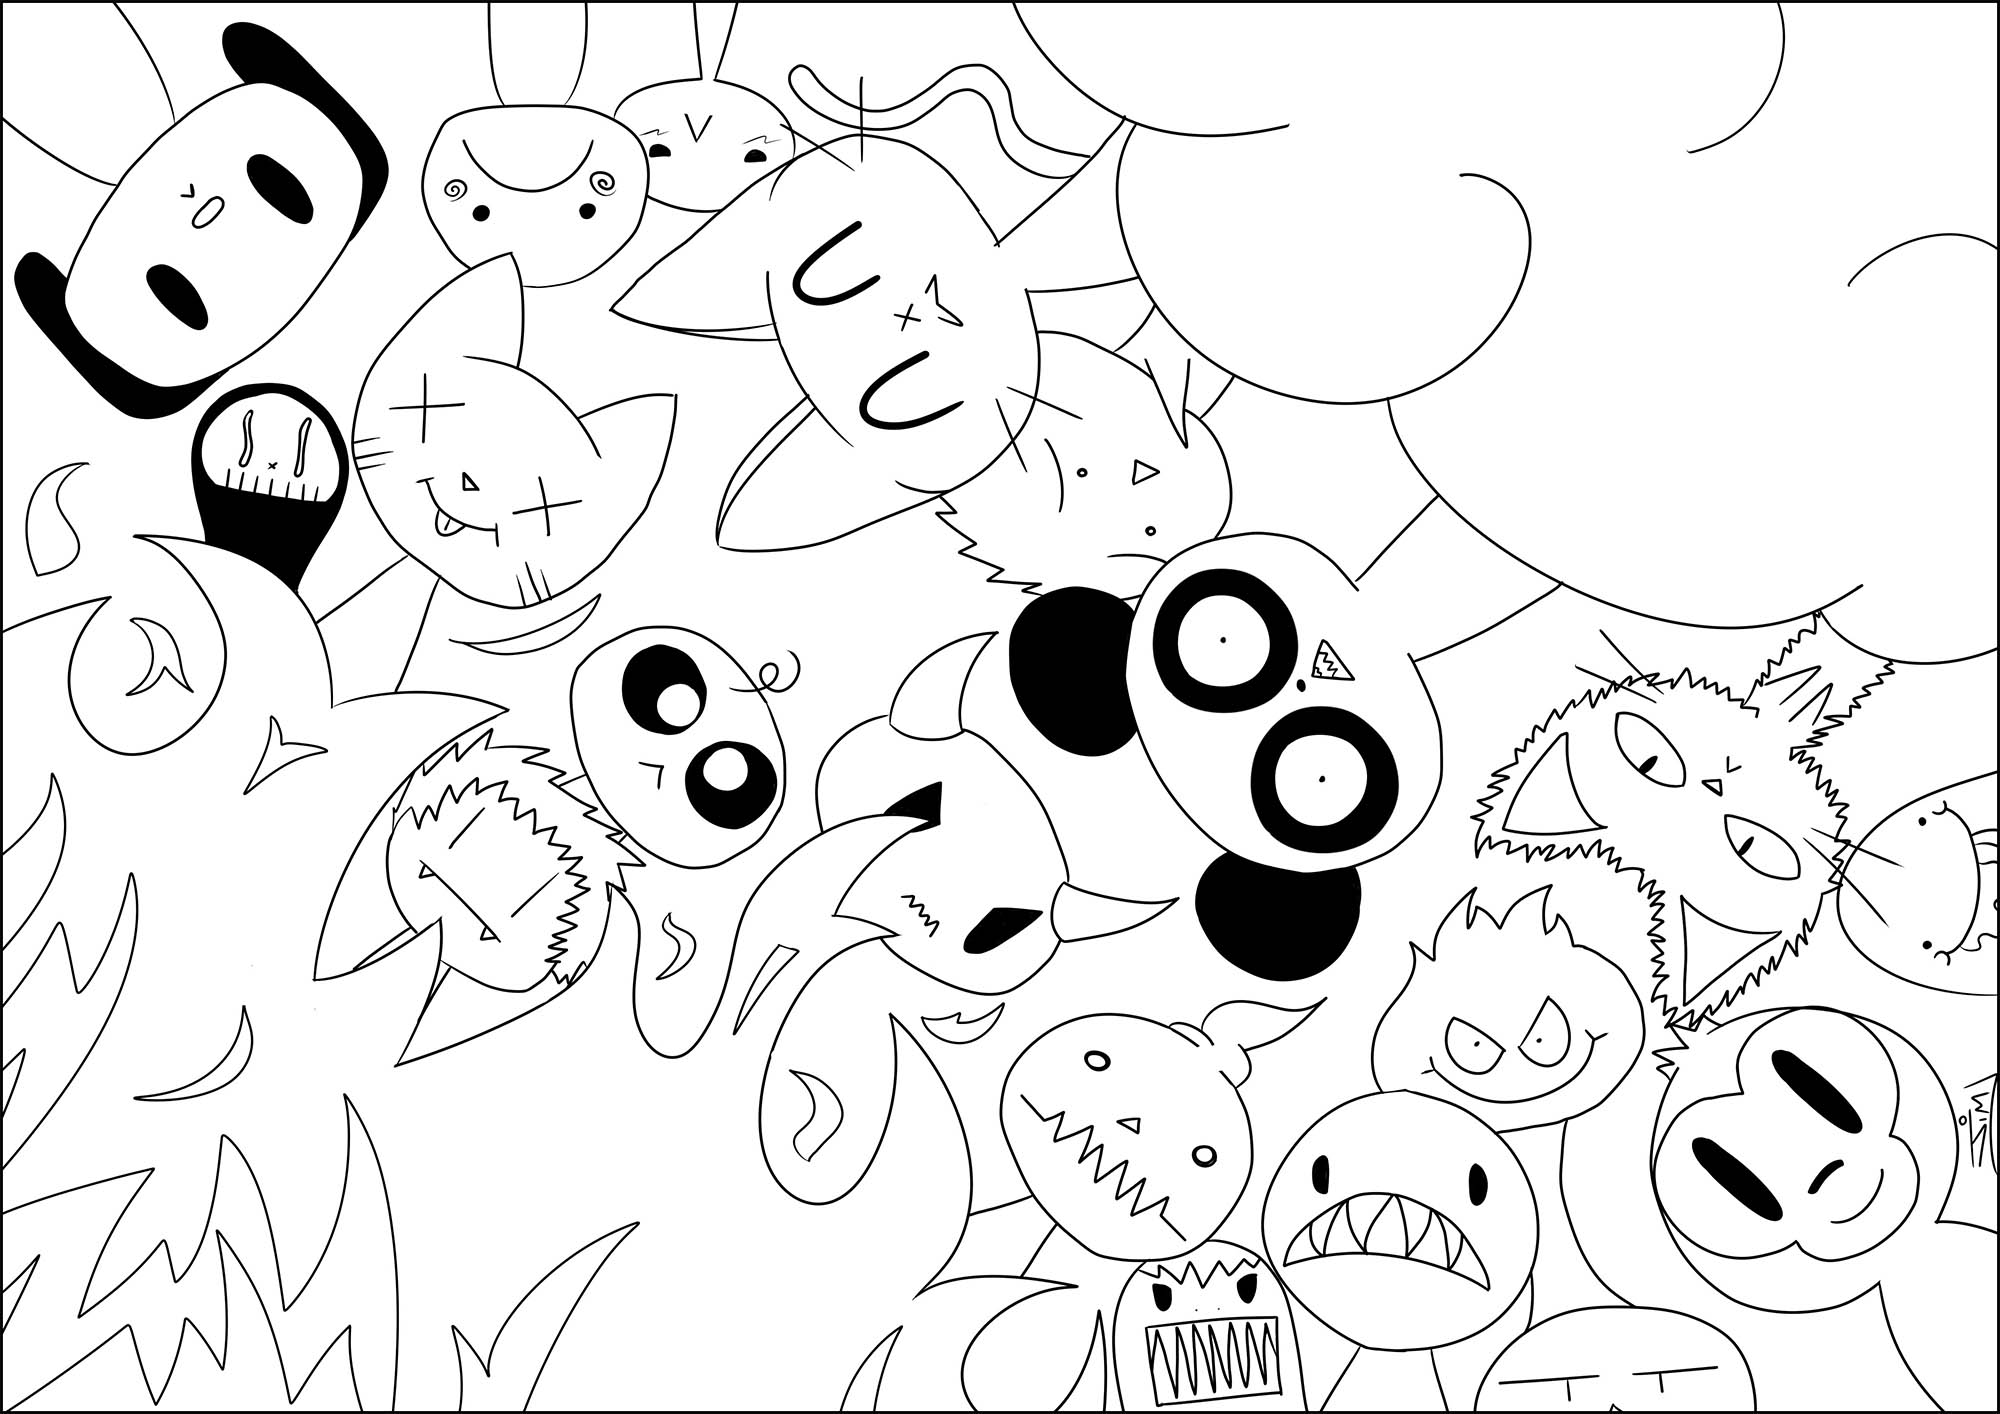 Incredible Kawaii coloring page to print and color for free